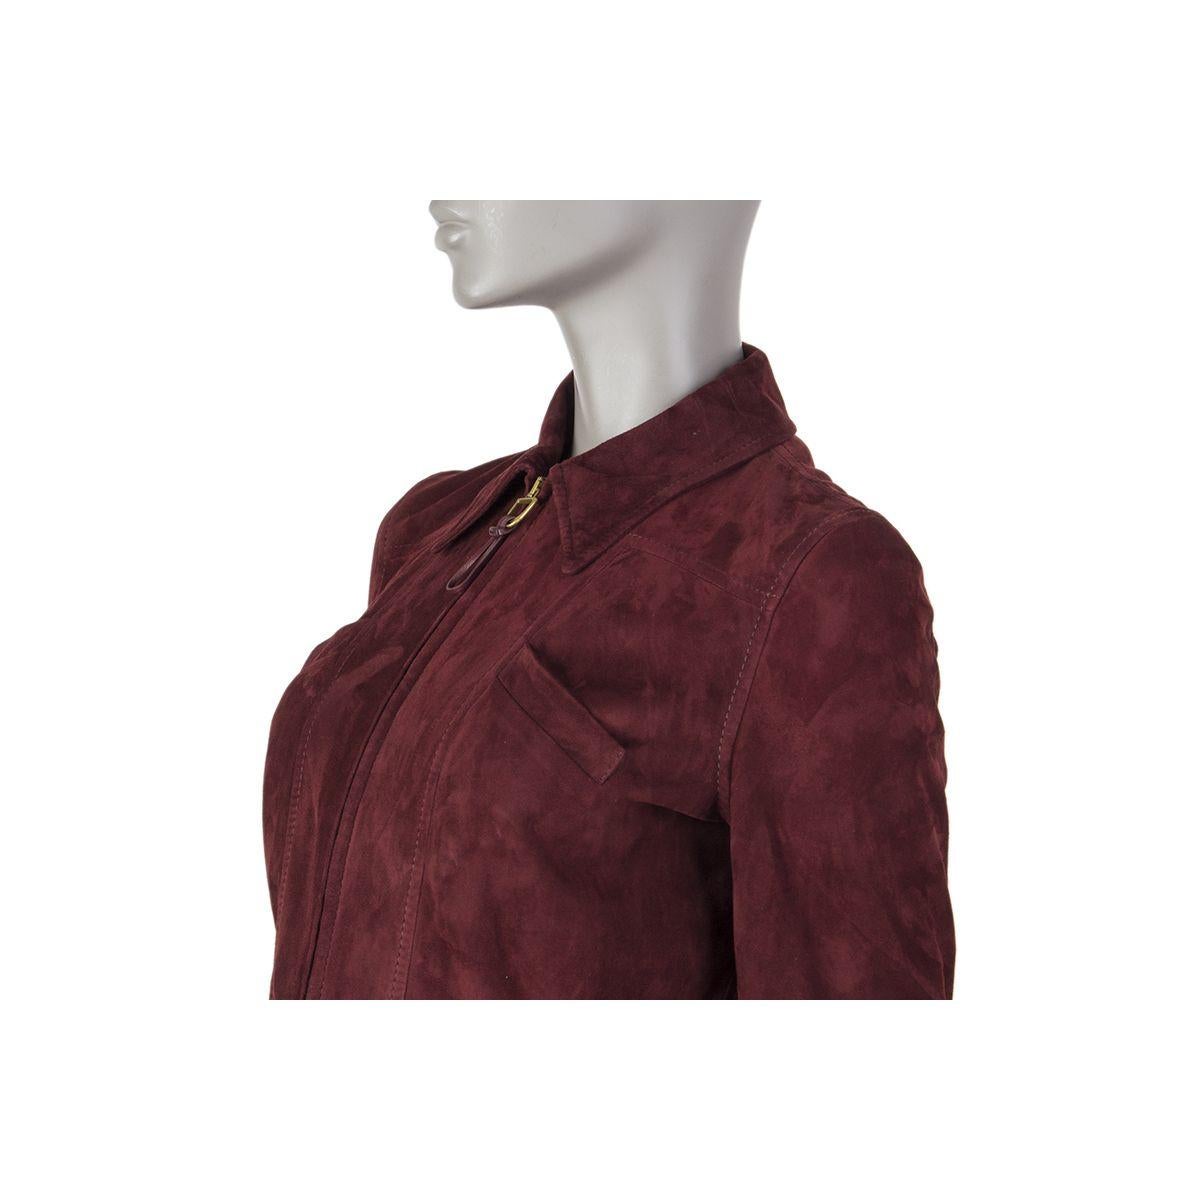 100% authentic Ralph Lauren zipper jacket in burgundy lambskin suede (100%) with a flat collar, four slit pockets on the front and a leather belt around the waist. Closes with two-way zipper. Lined in black viscose (100%). Has been worn and is in